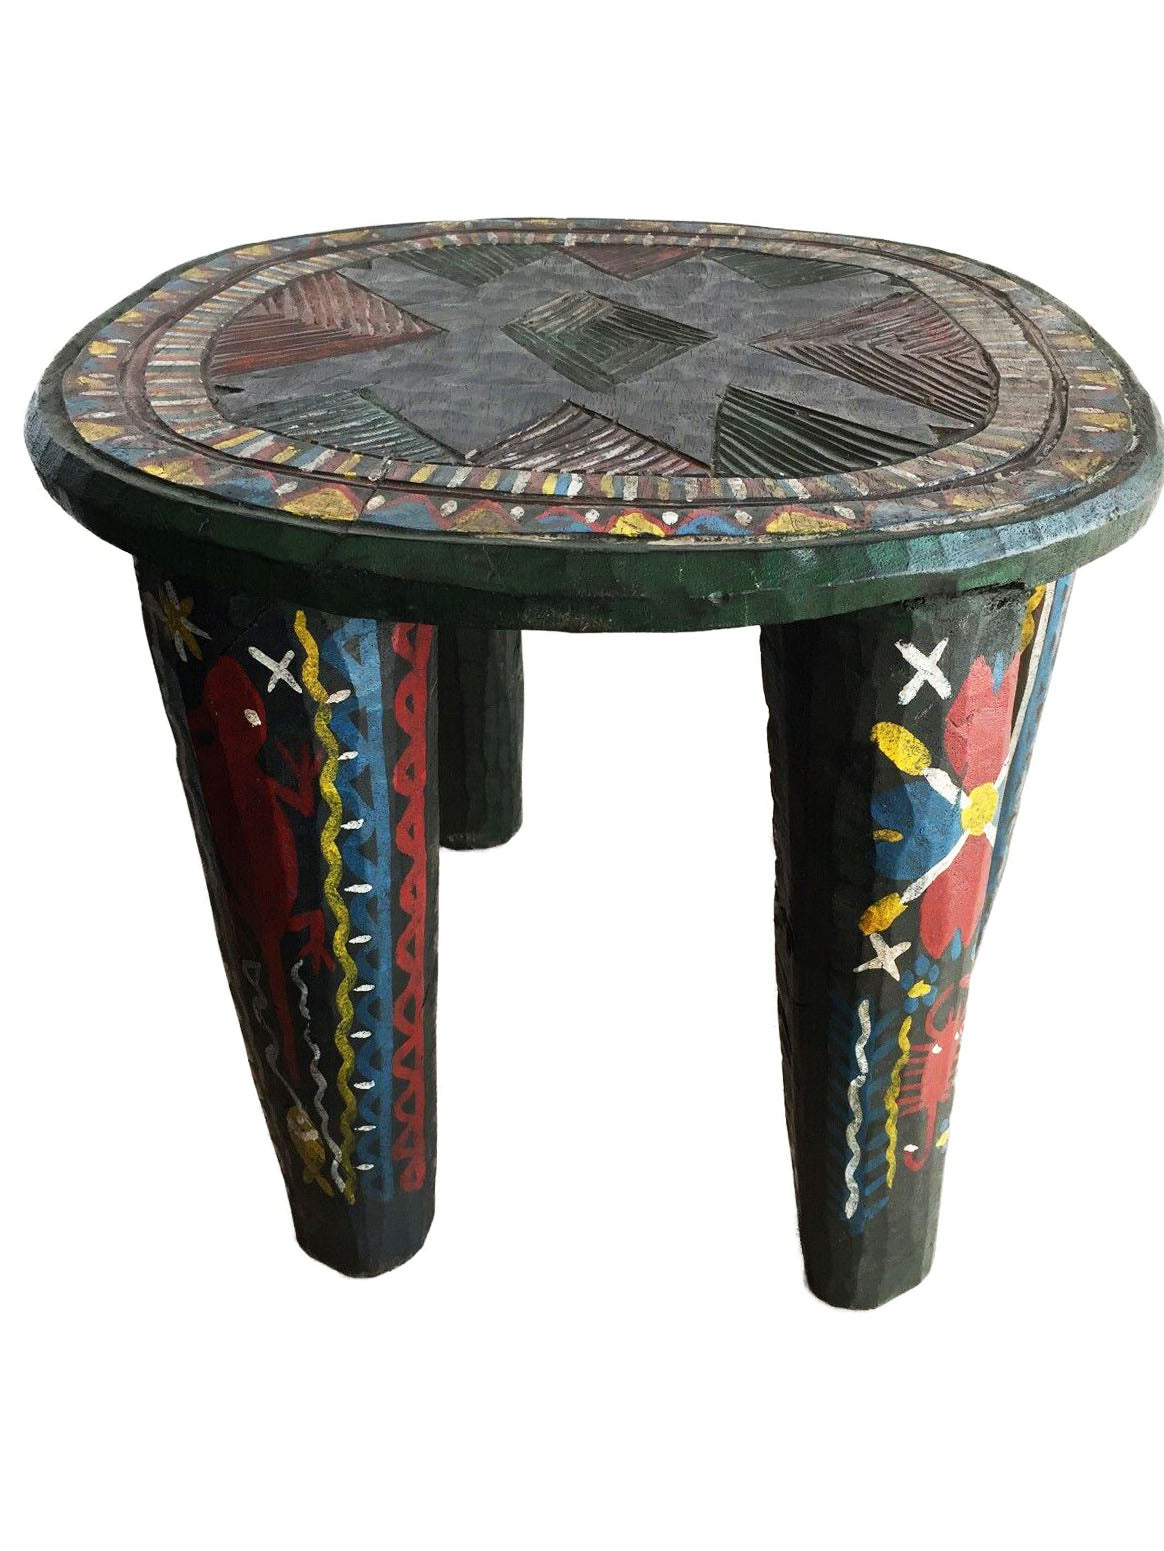 #2169 African LG Colorful  Nupe Stool / Table Nigeria  14" H by 17.5" W